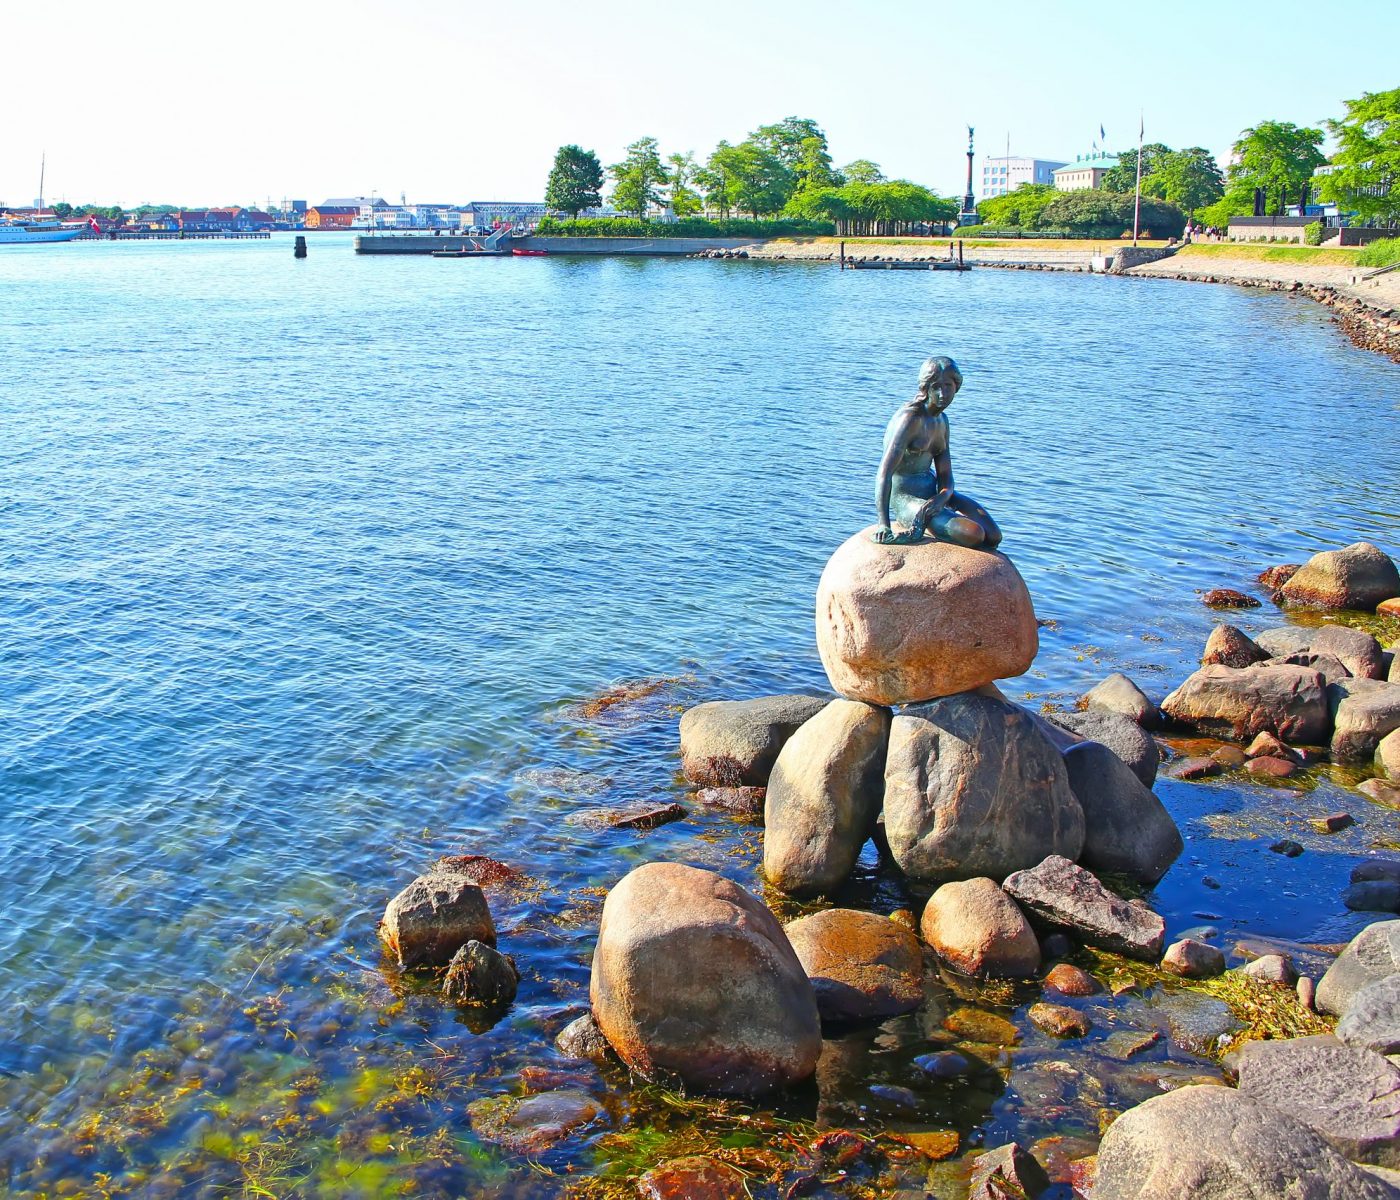 Langelinie promenade with the iconic little mermaid statue & landmark in the foreground and the harbour in the background, Copenhagen, Denmark.